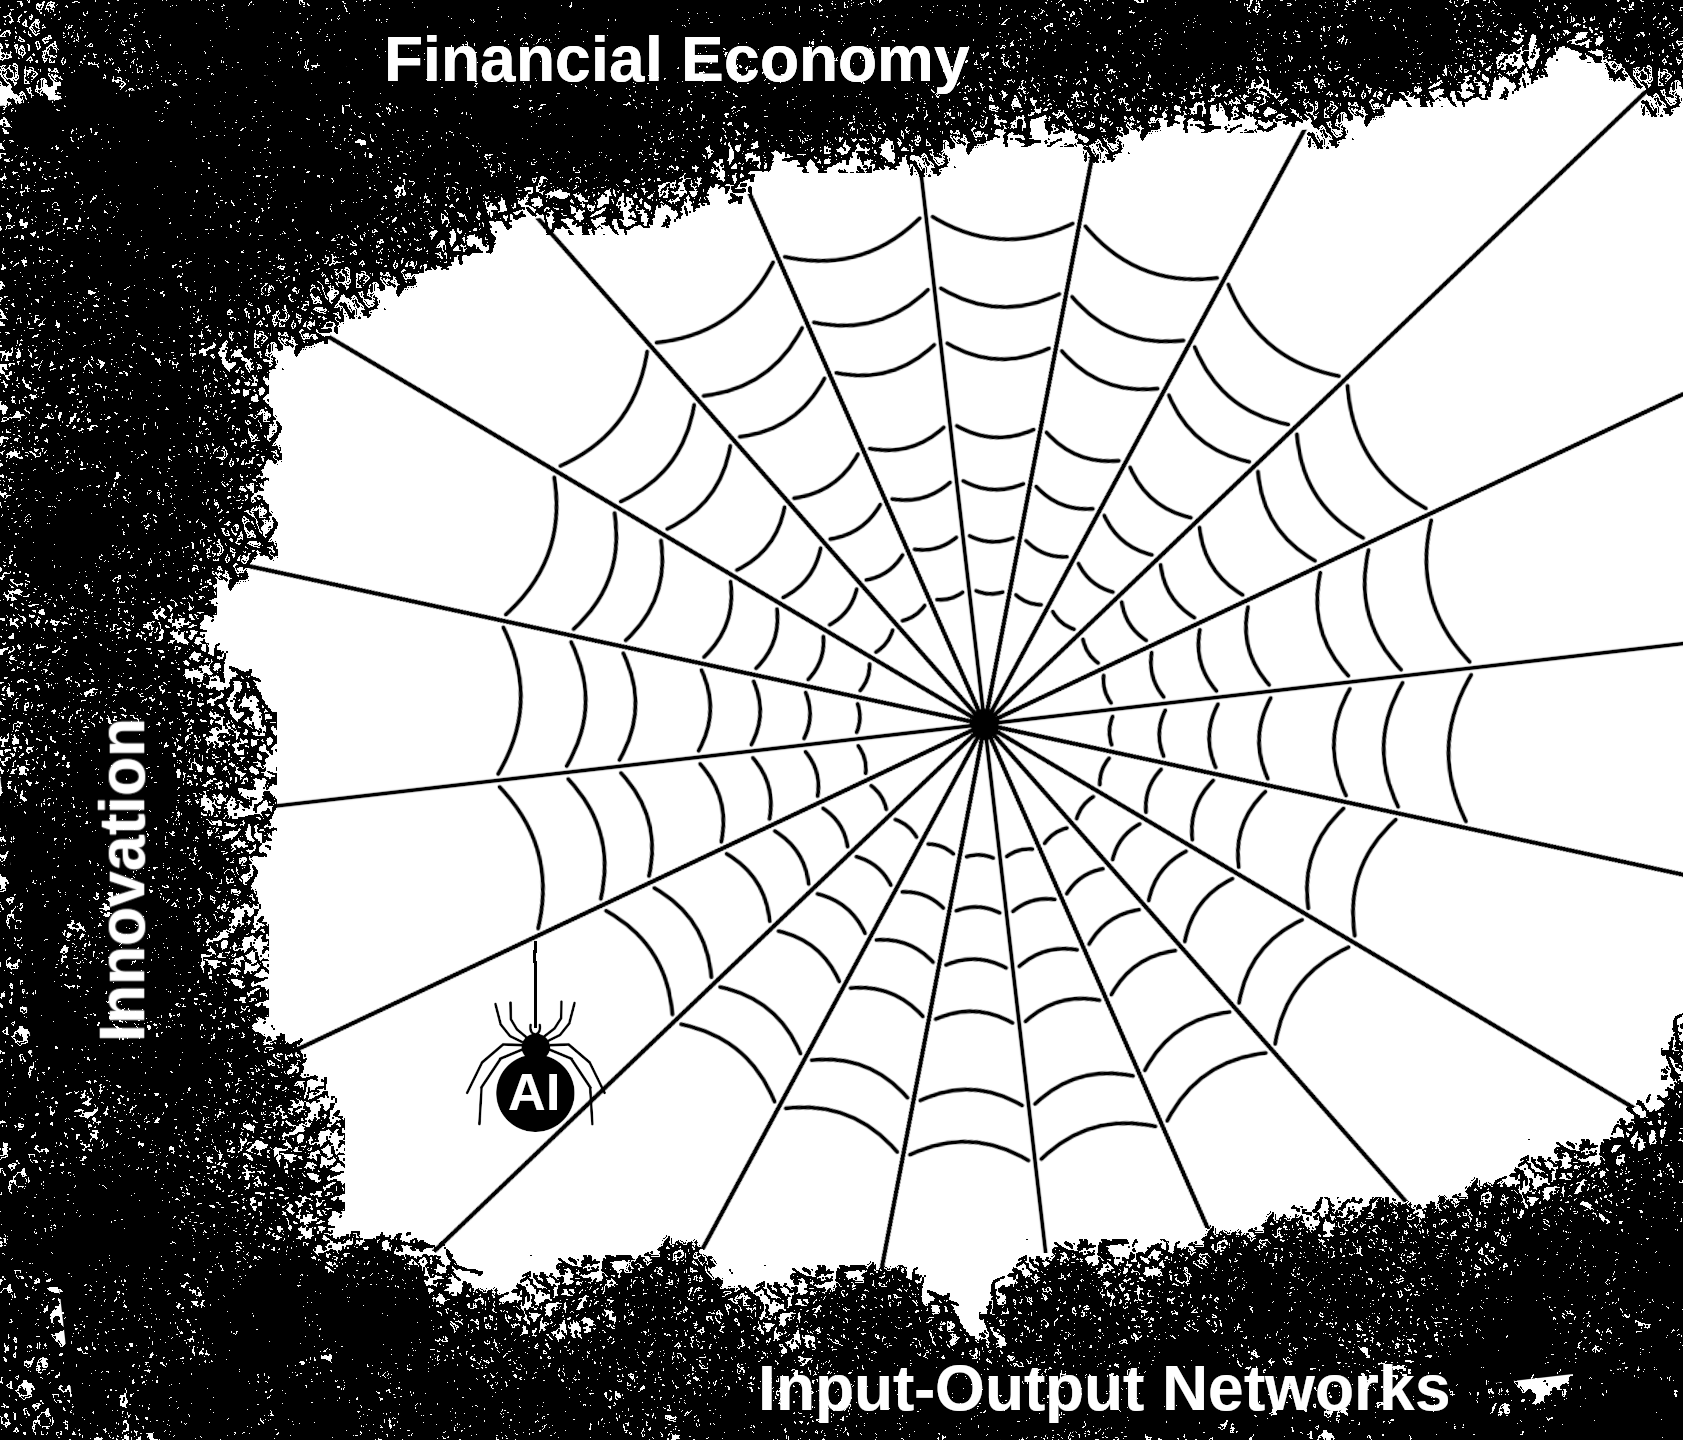 New entanglements. EAEPE call 2024. Spider weaving financial economy, innovation, input-output systems together.